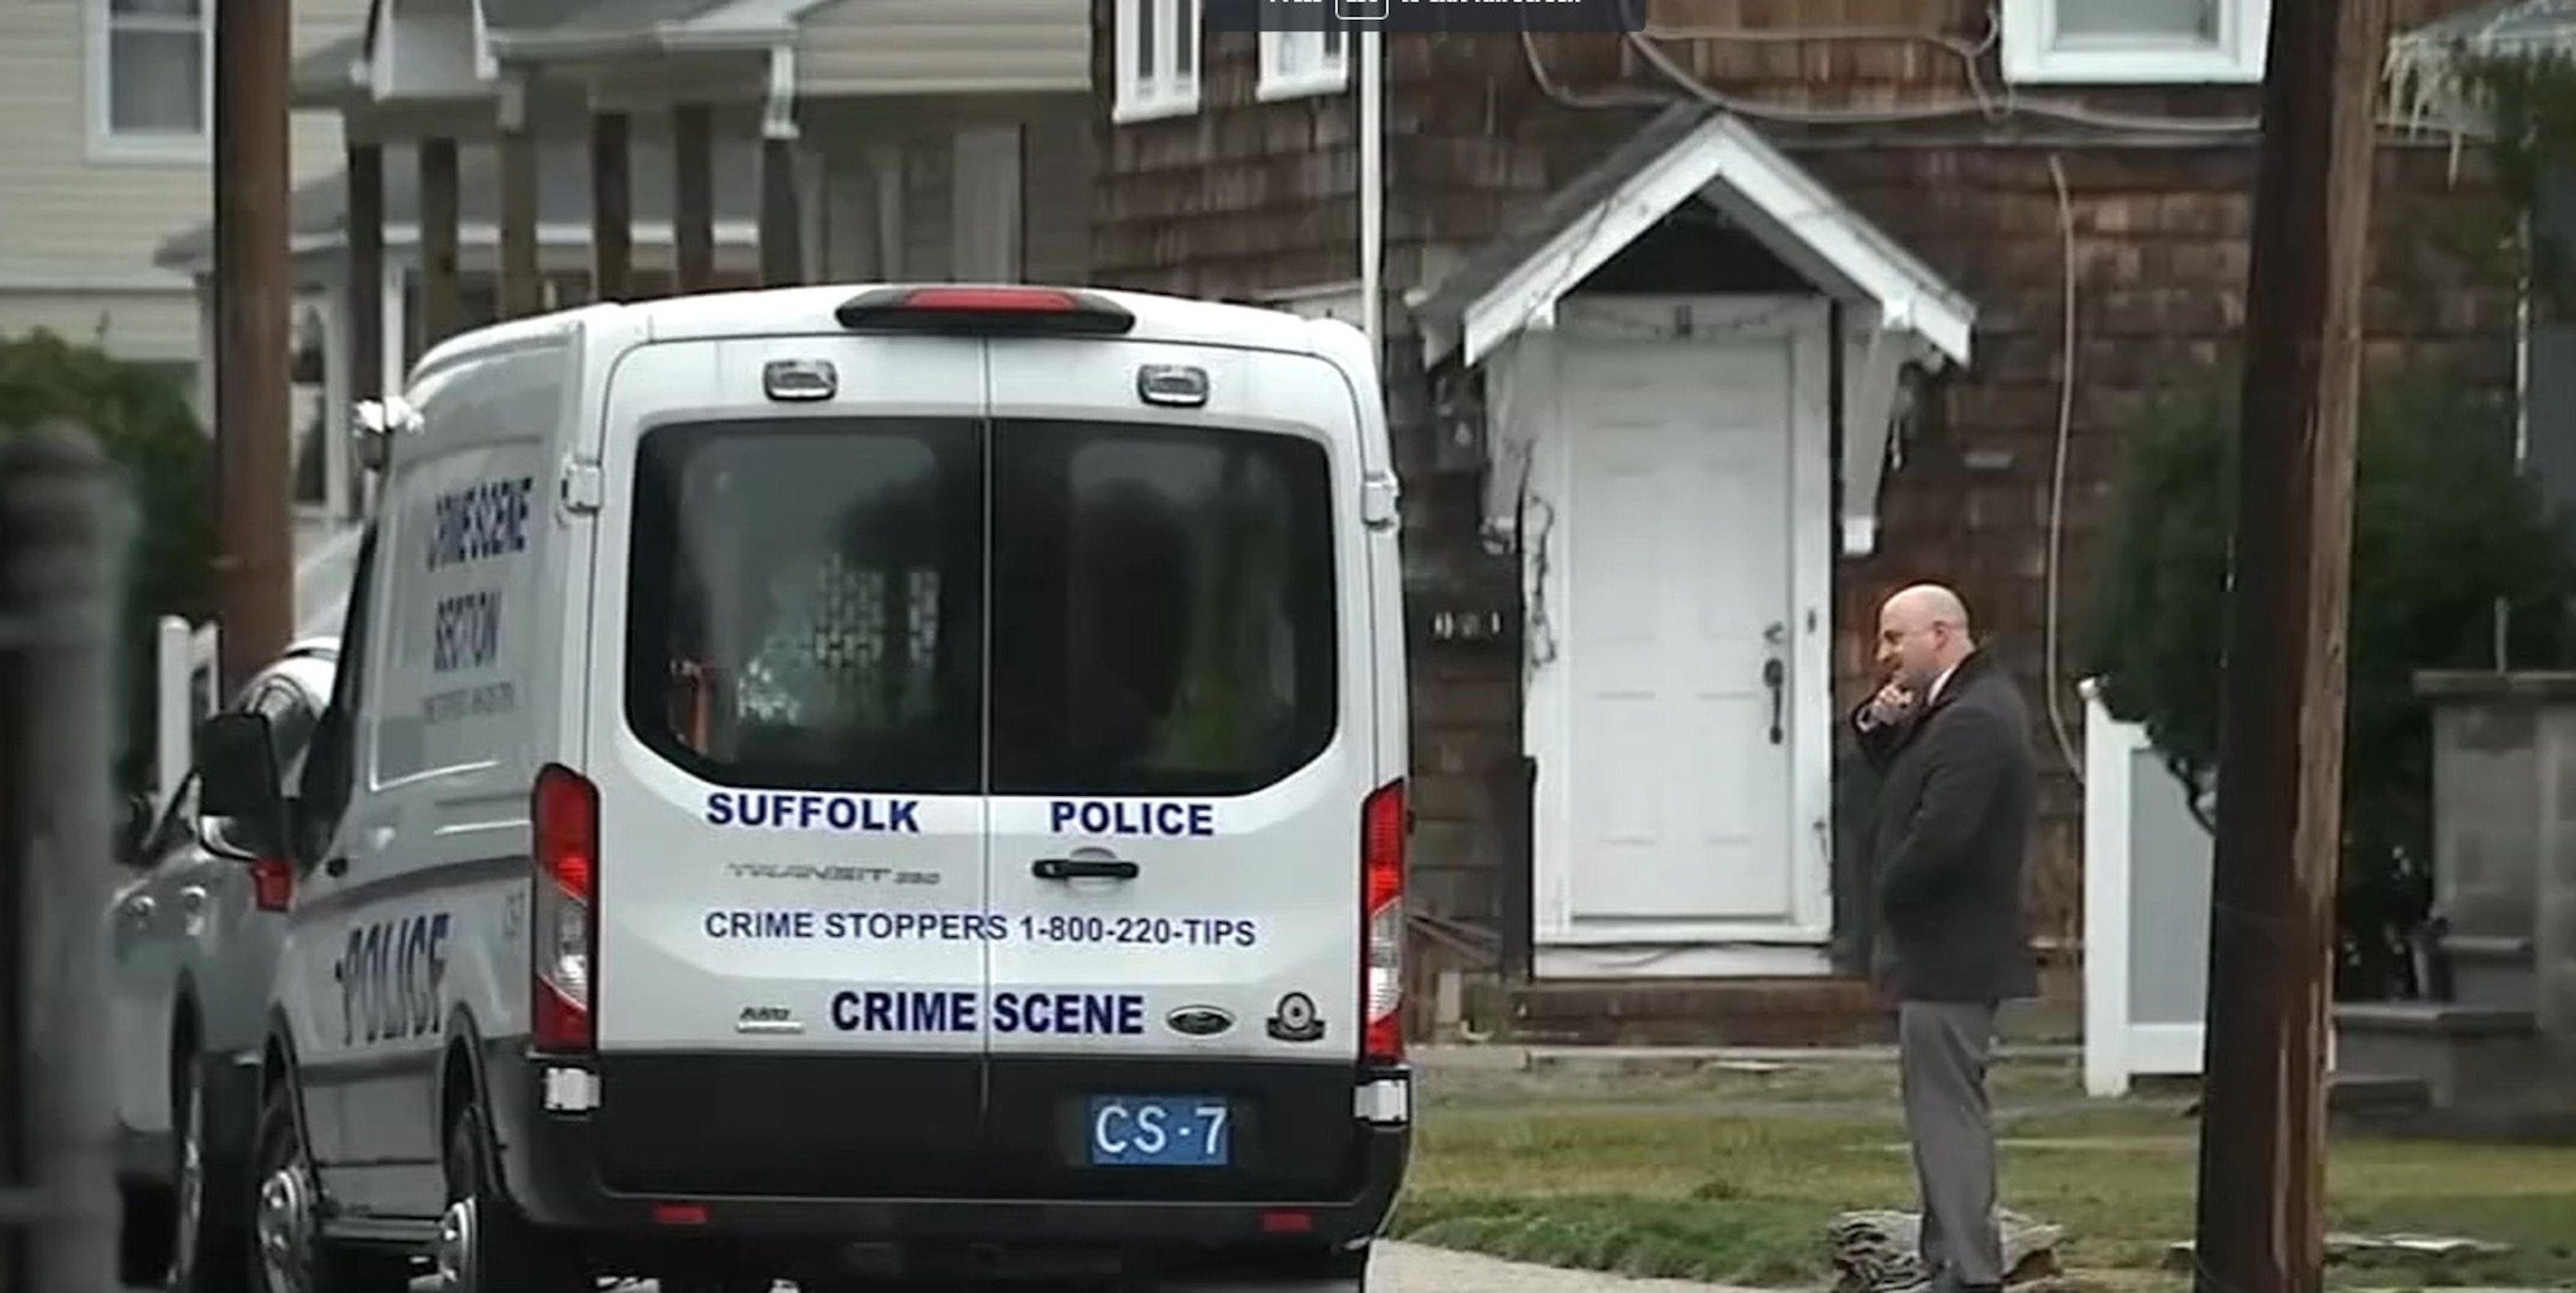 PHOTO: Police are shown on the scene in Suffolk County, New York, in connection to the discovery of body parts last week, on March 5, 2024.